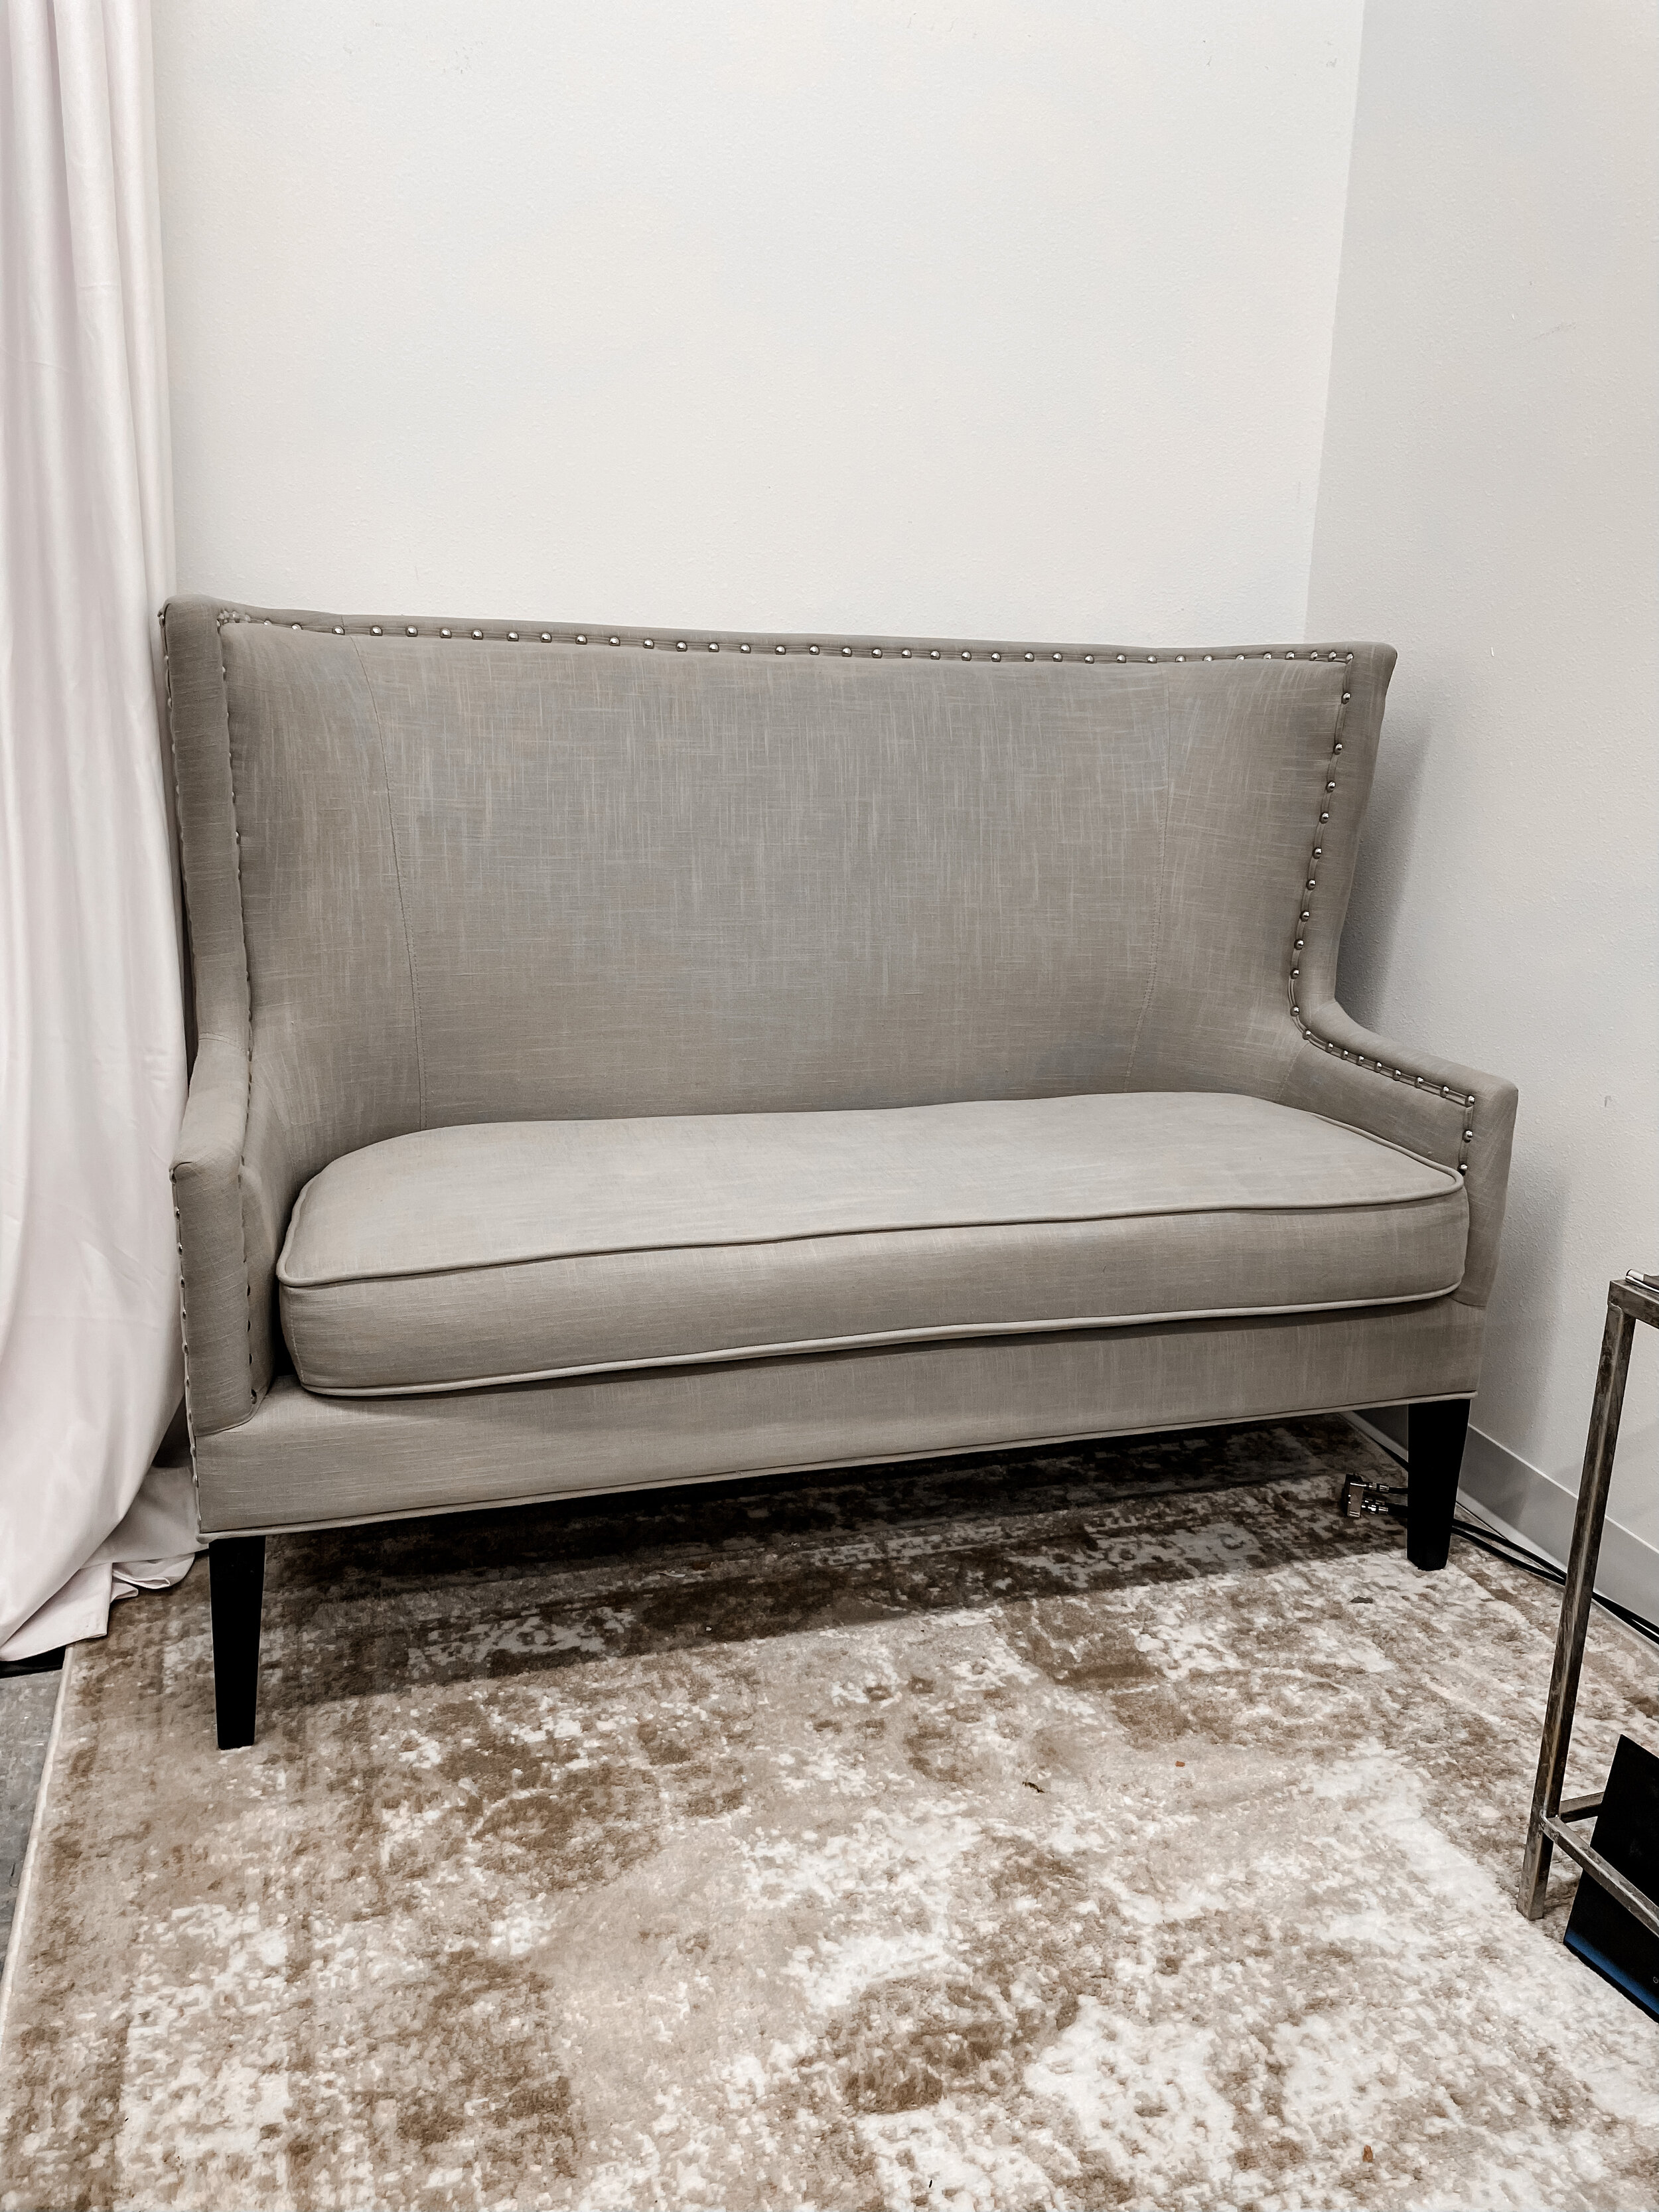 Light Grey Loveseat - Sweetheart Table or Lounge Seating (1) - $100